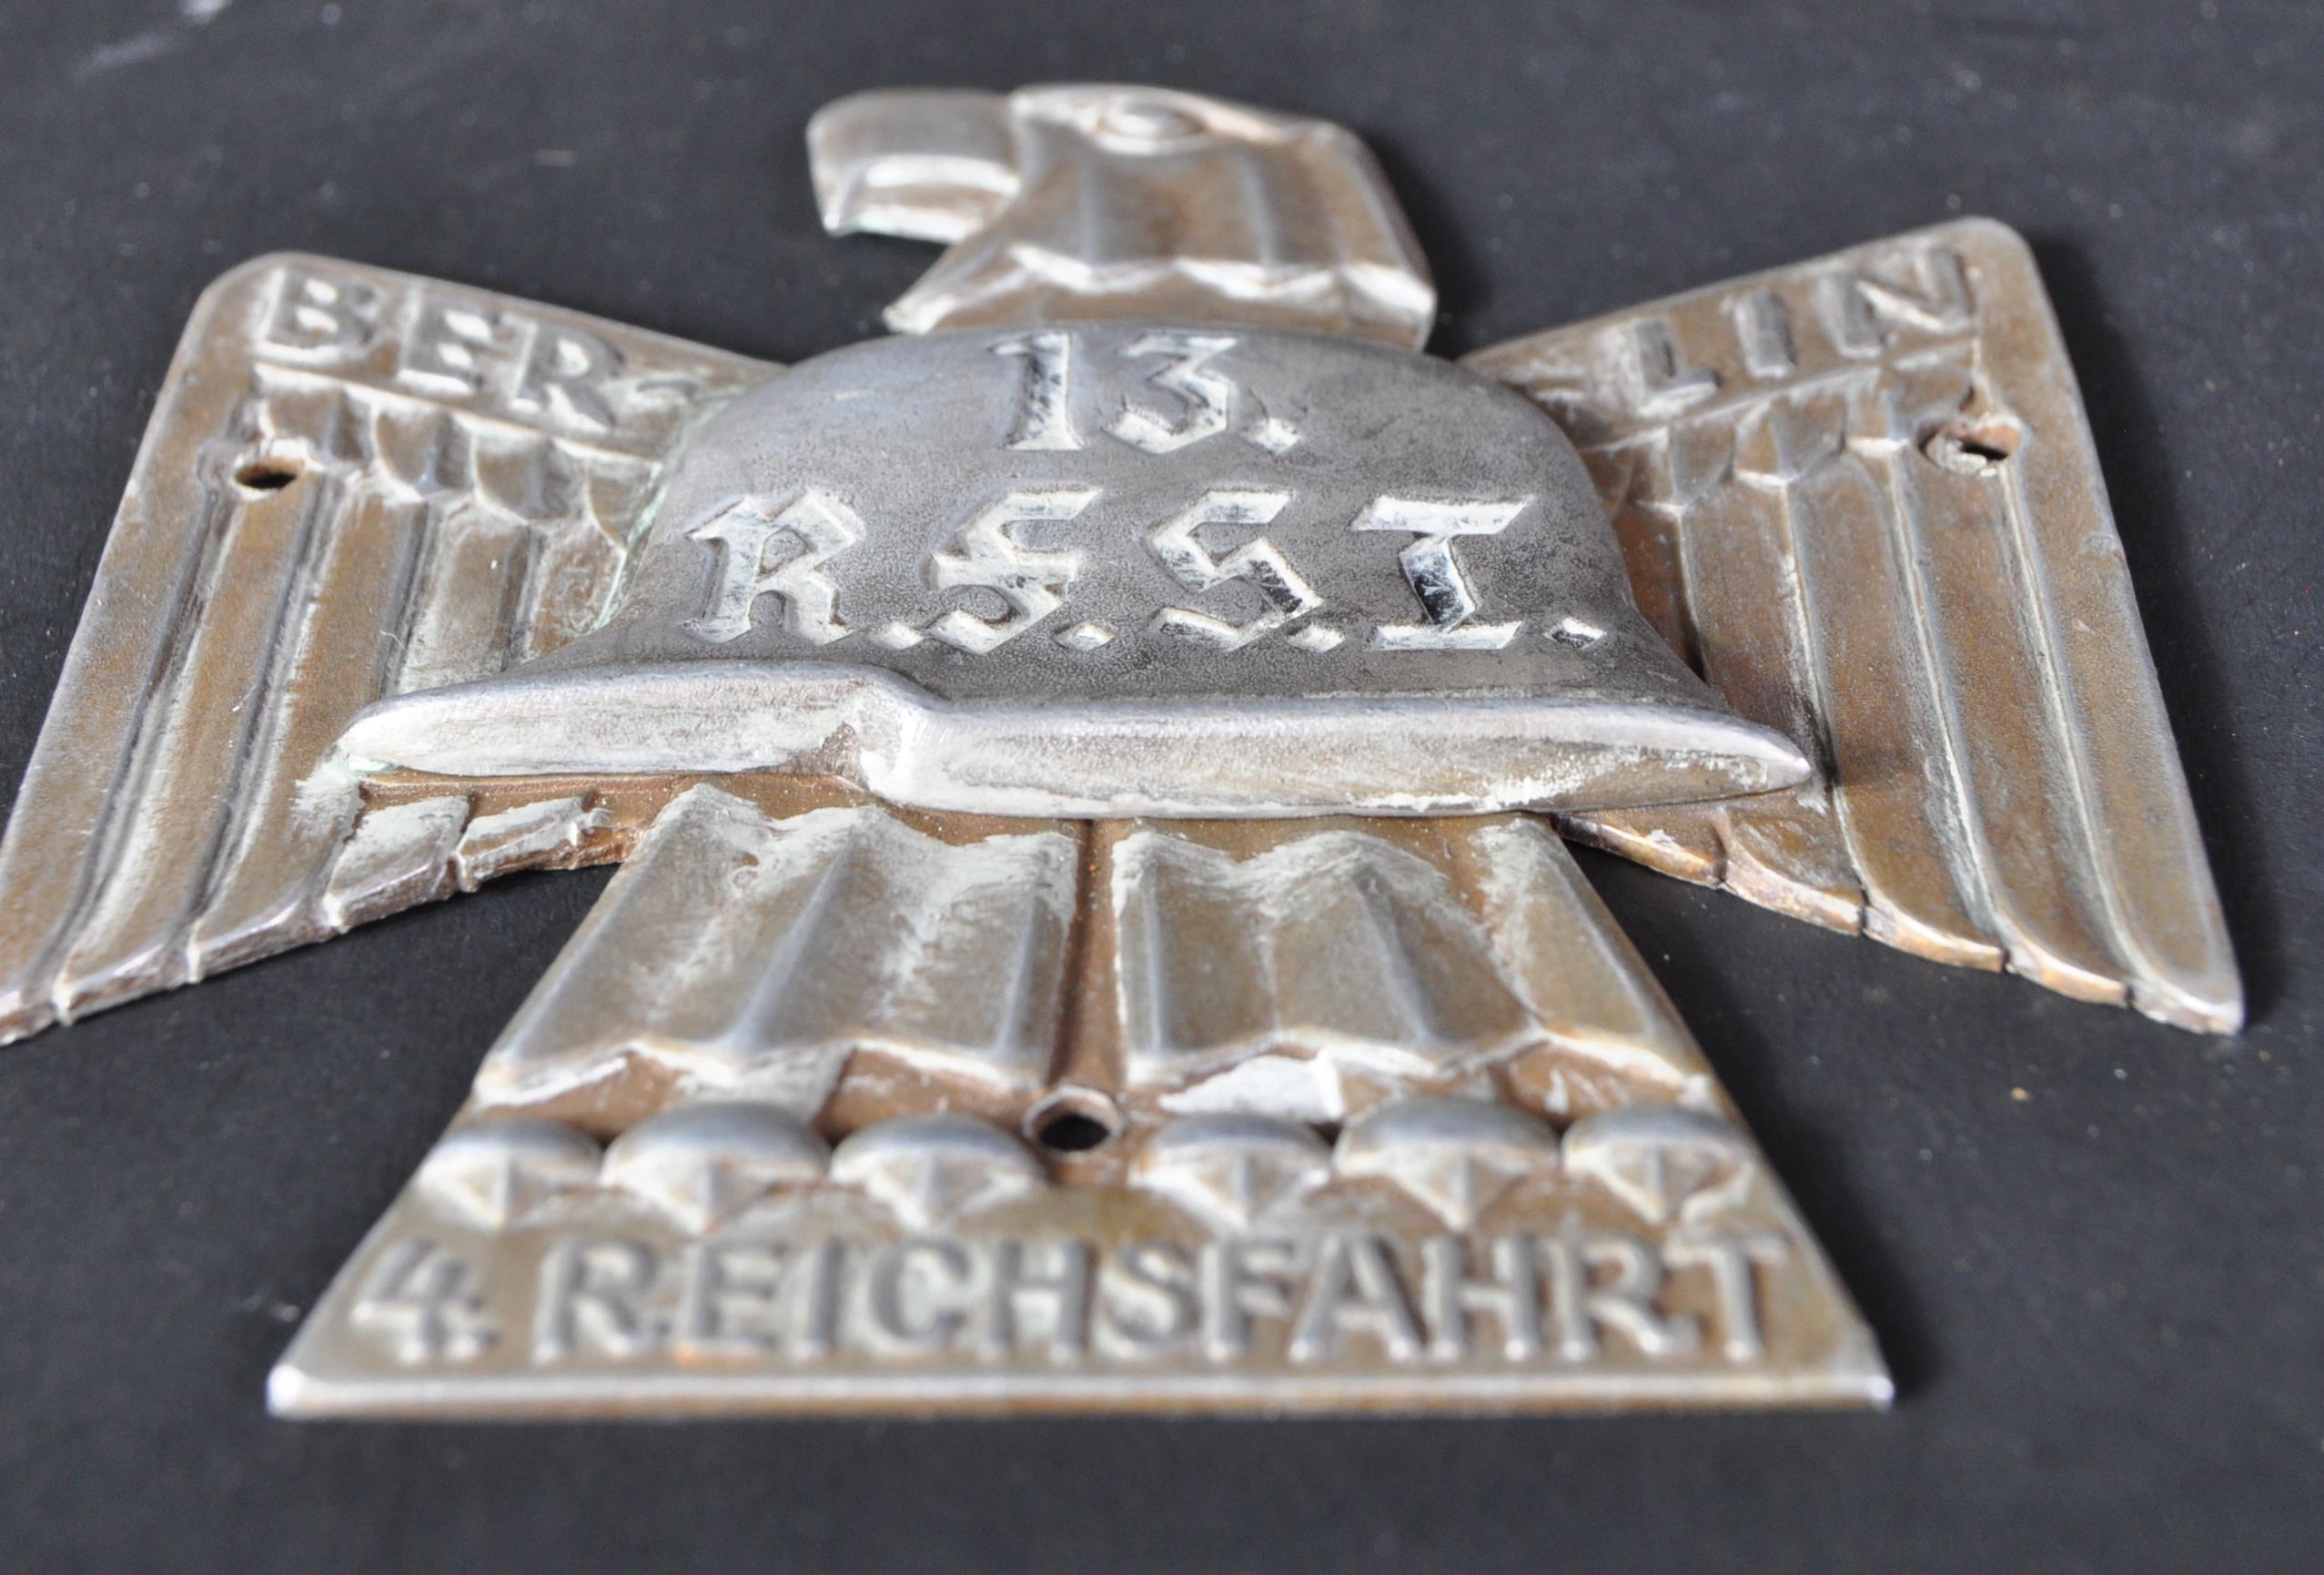 PRE WWII SECOND WORLD WAR GERMAN THIRD REICH 13 R.F.S.I BADGE - Image 2 of 3